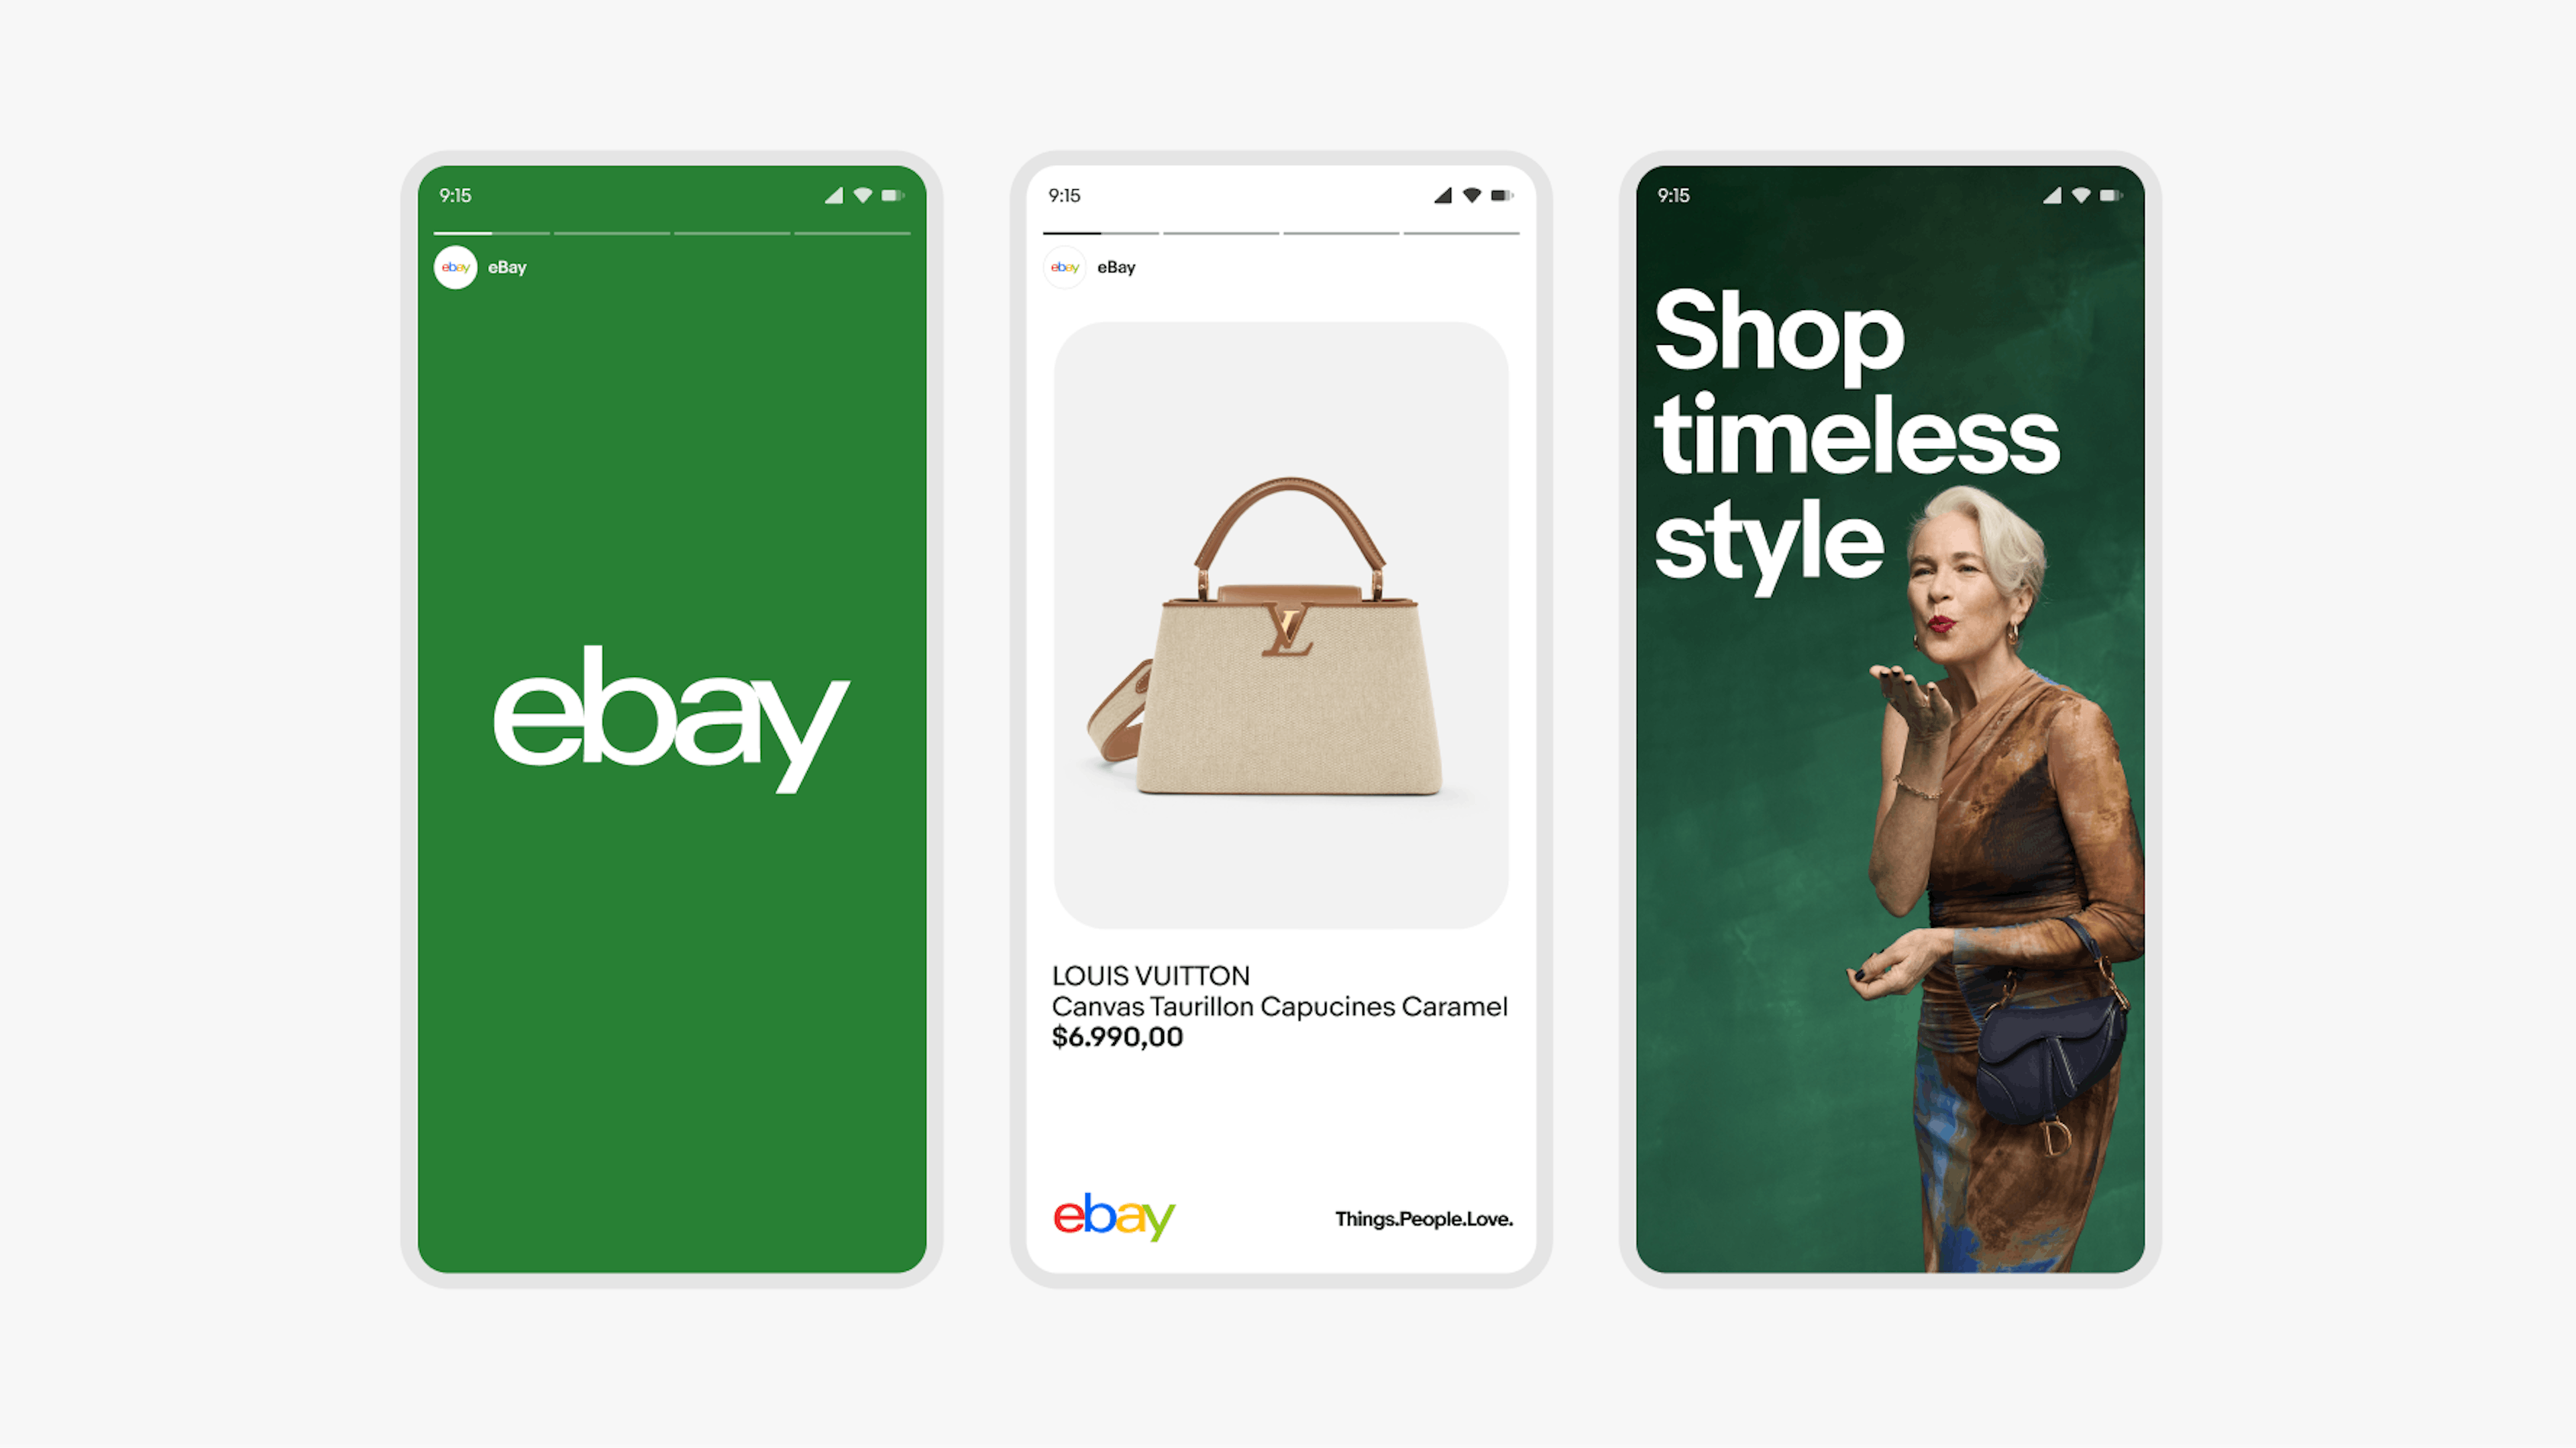 Three smartphone screens displaying eBay advertisements. The first screen shows the eBay logo on a green background. The second screen features a luxury handbag as a large item tile with text. The third screen shows an older woman in a stylish dress with the large text 'Shop timeless style' on a green background.